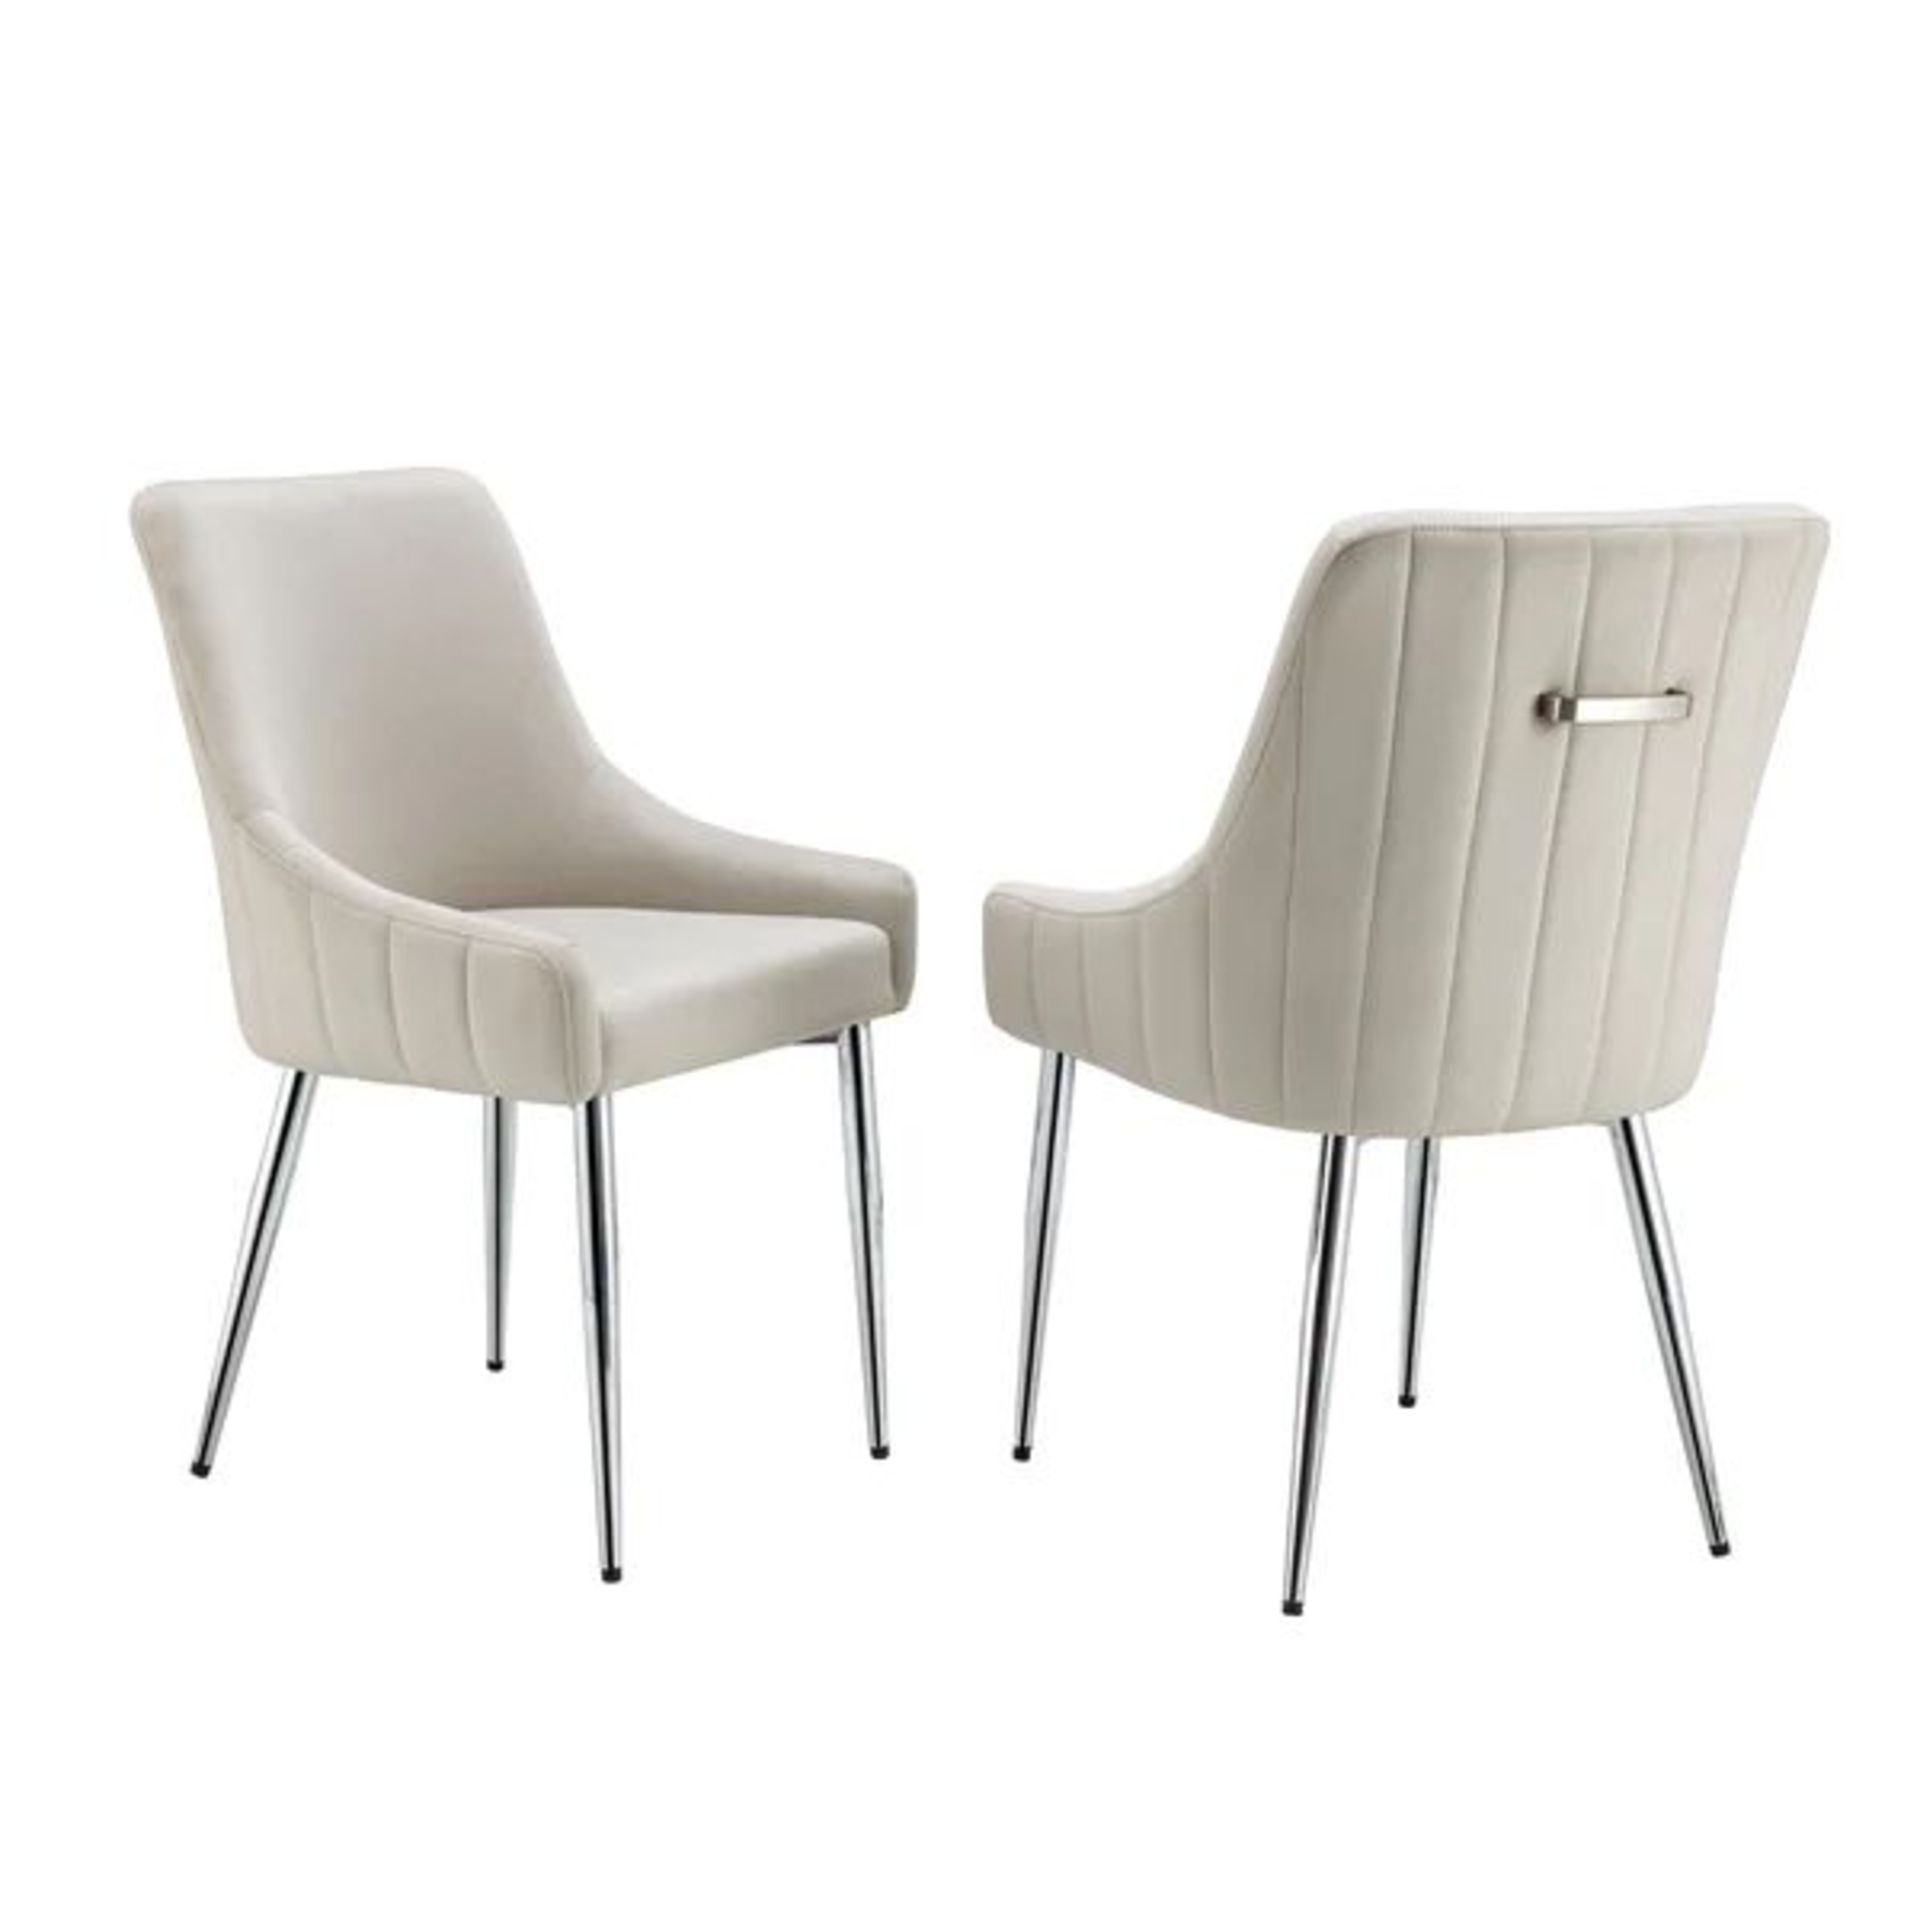 Garnet Set of 2 Champagne Velvet Upholstered Dining Chairs with Back Handle. -R14. RRP £309.99. - Image 2 of 2